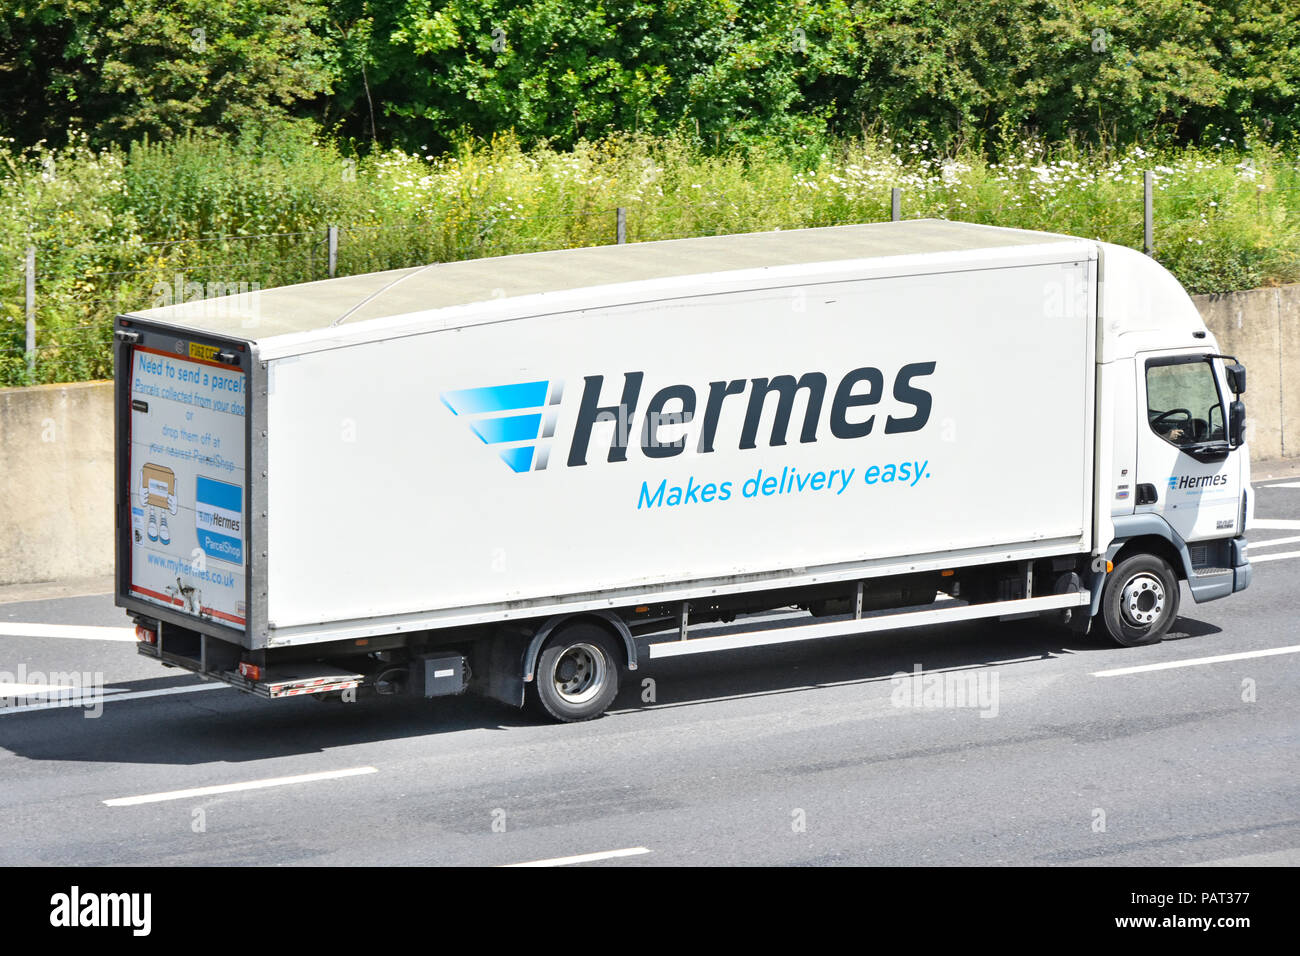 Transportation by Hermes Makes delivery easy says advertising slogan on side of supply chain transport hgv lorry truck M25 motorway Essex England UK Stock Photo